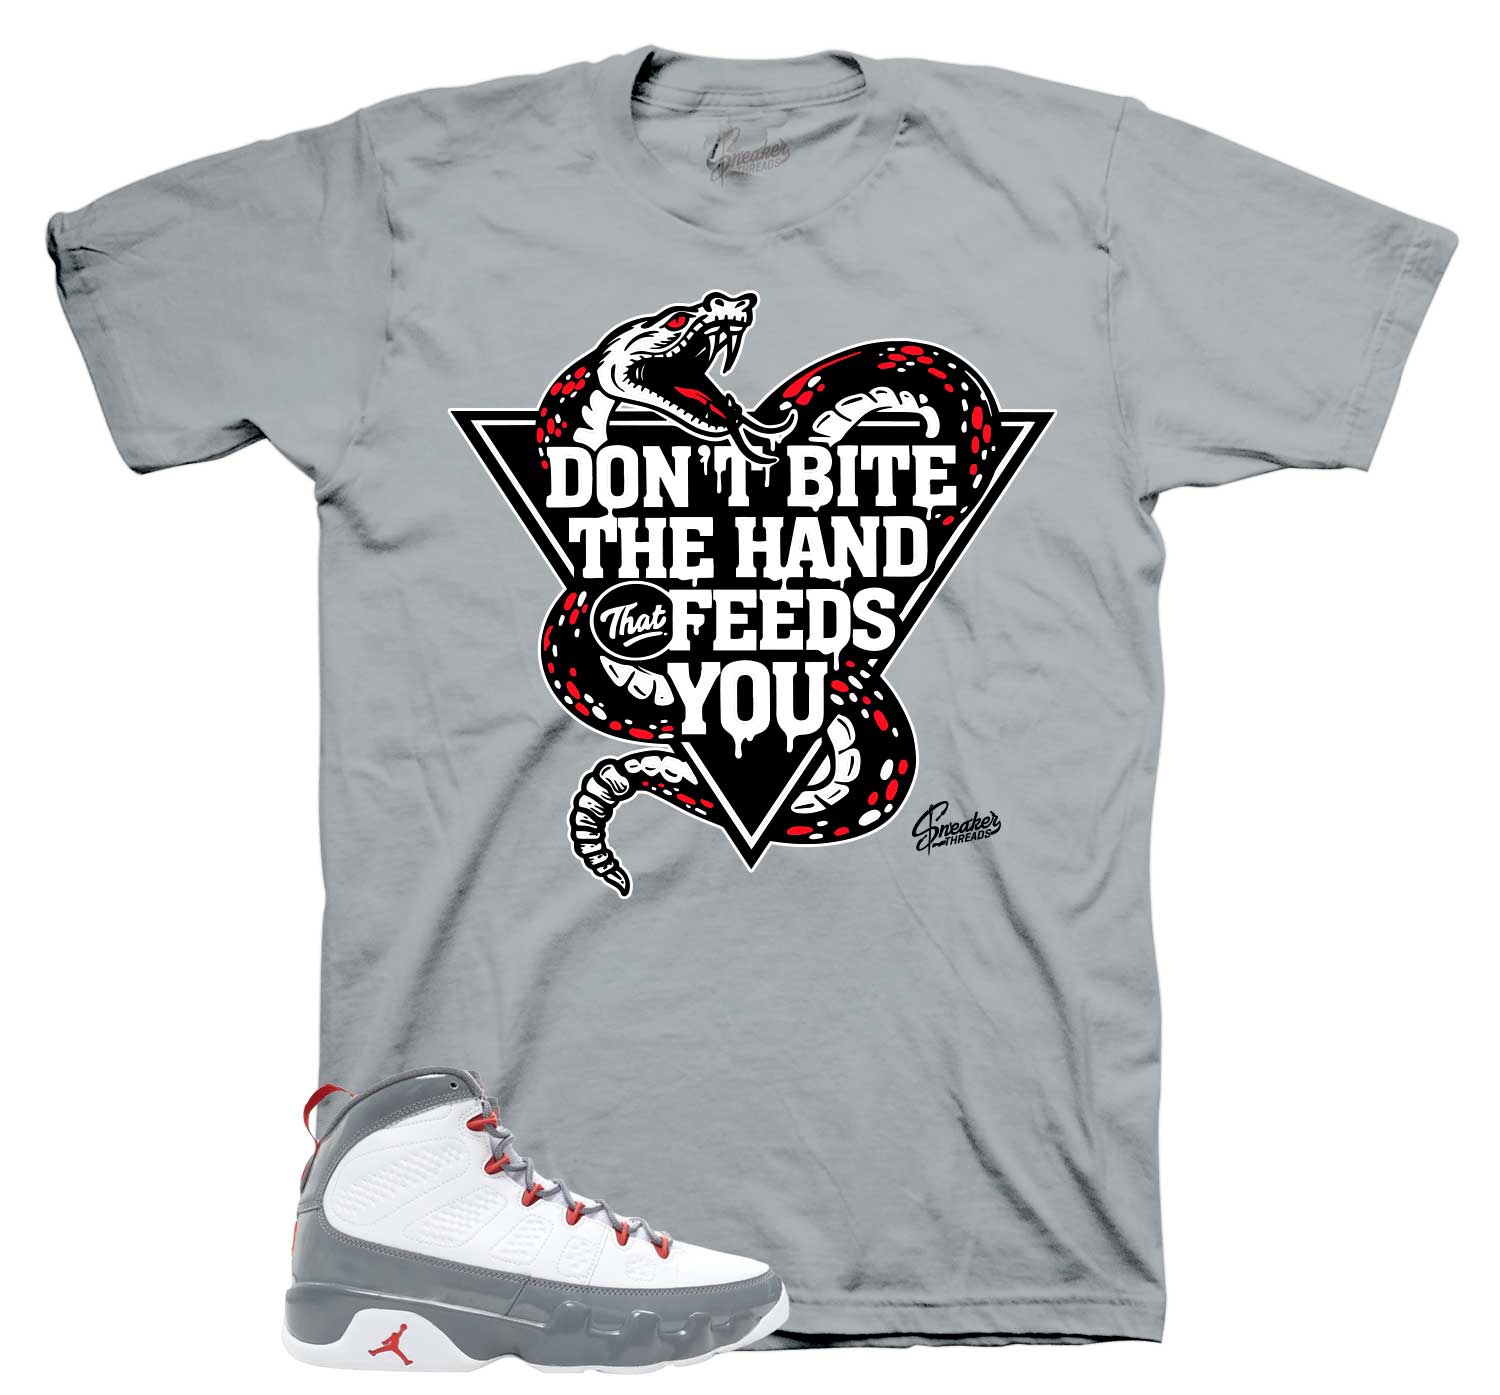 Retro 9 Fire Red Shirt - Don't Bite - Grey